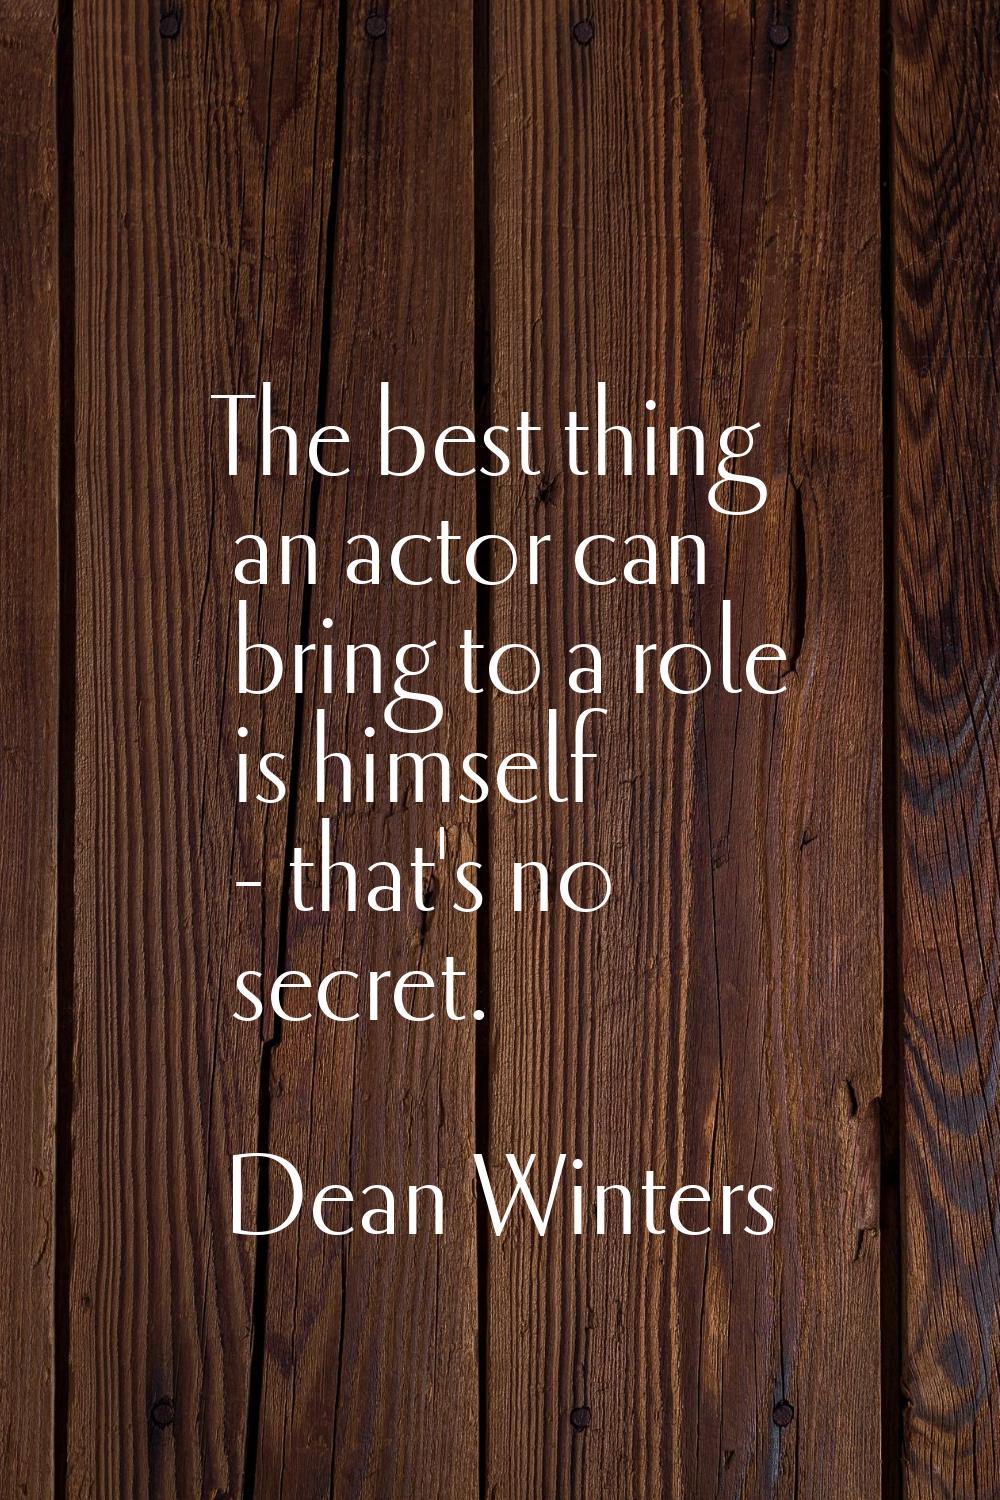 The best thing an actor can bring to a role is himself - that's no secret.